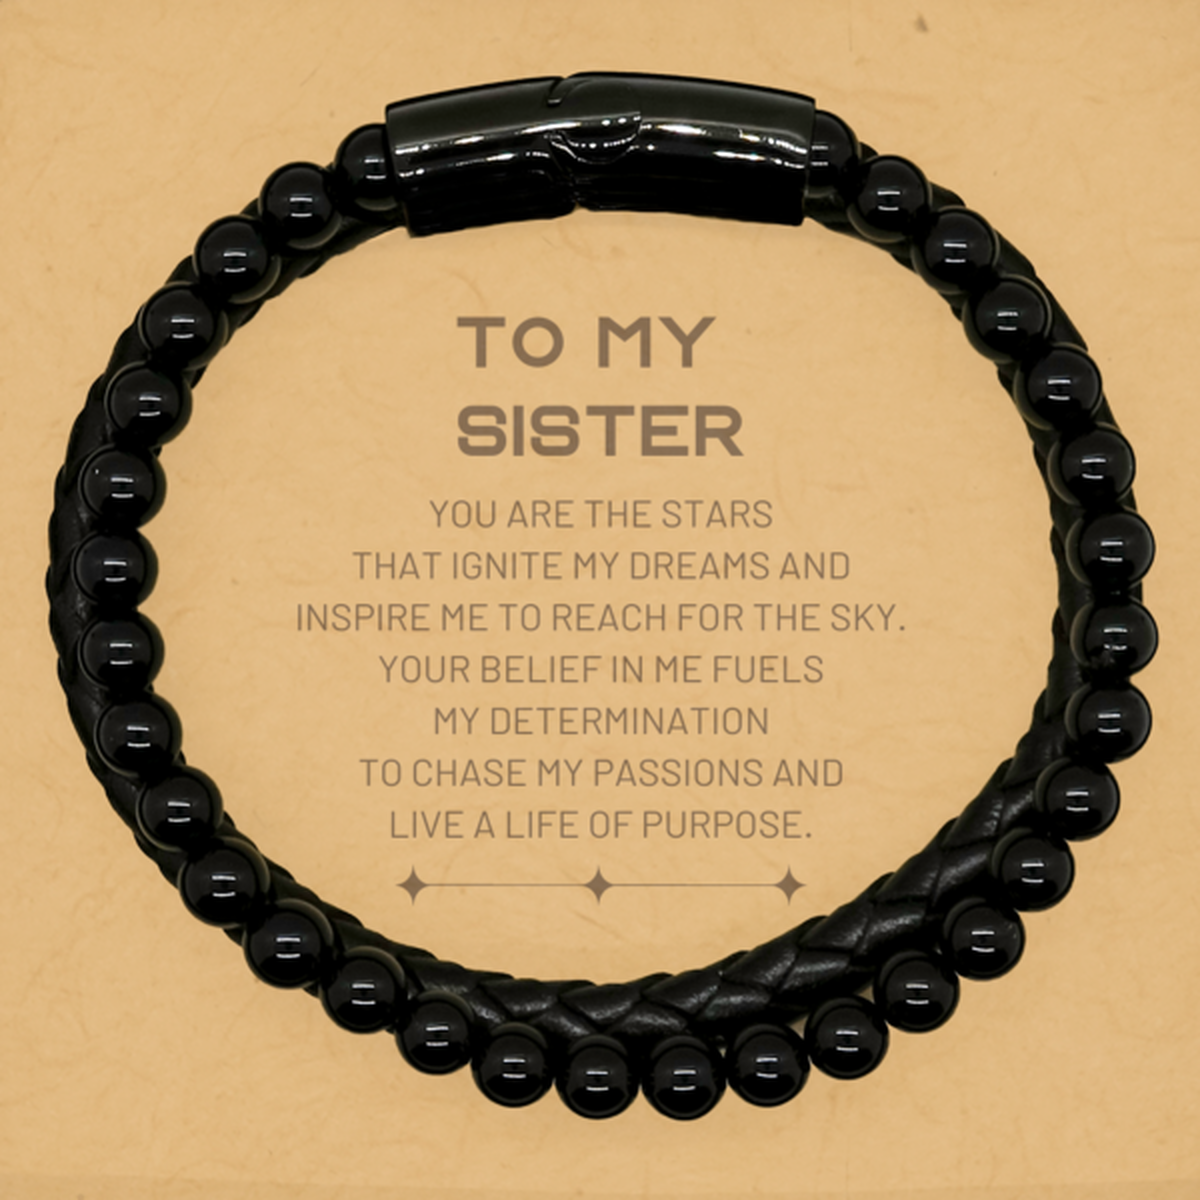 To My Sister Stone Leather Bracelets, You are the stars that ignite my dreams and inspire me to reach for the sky, Birthday Unique Gifts For Sister, Thank You Gifts For Sister